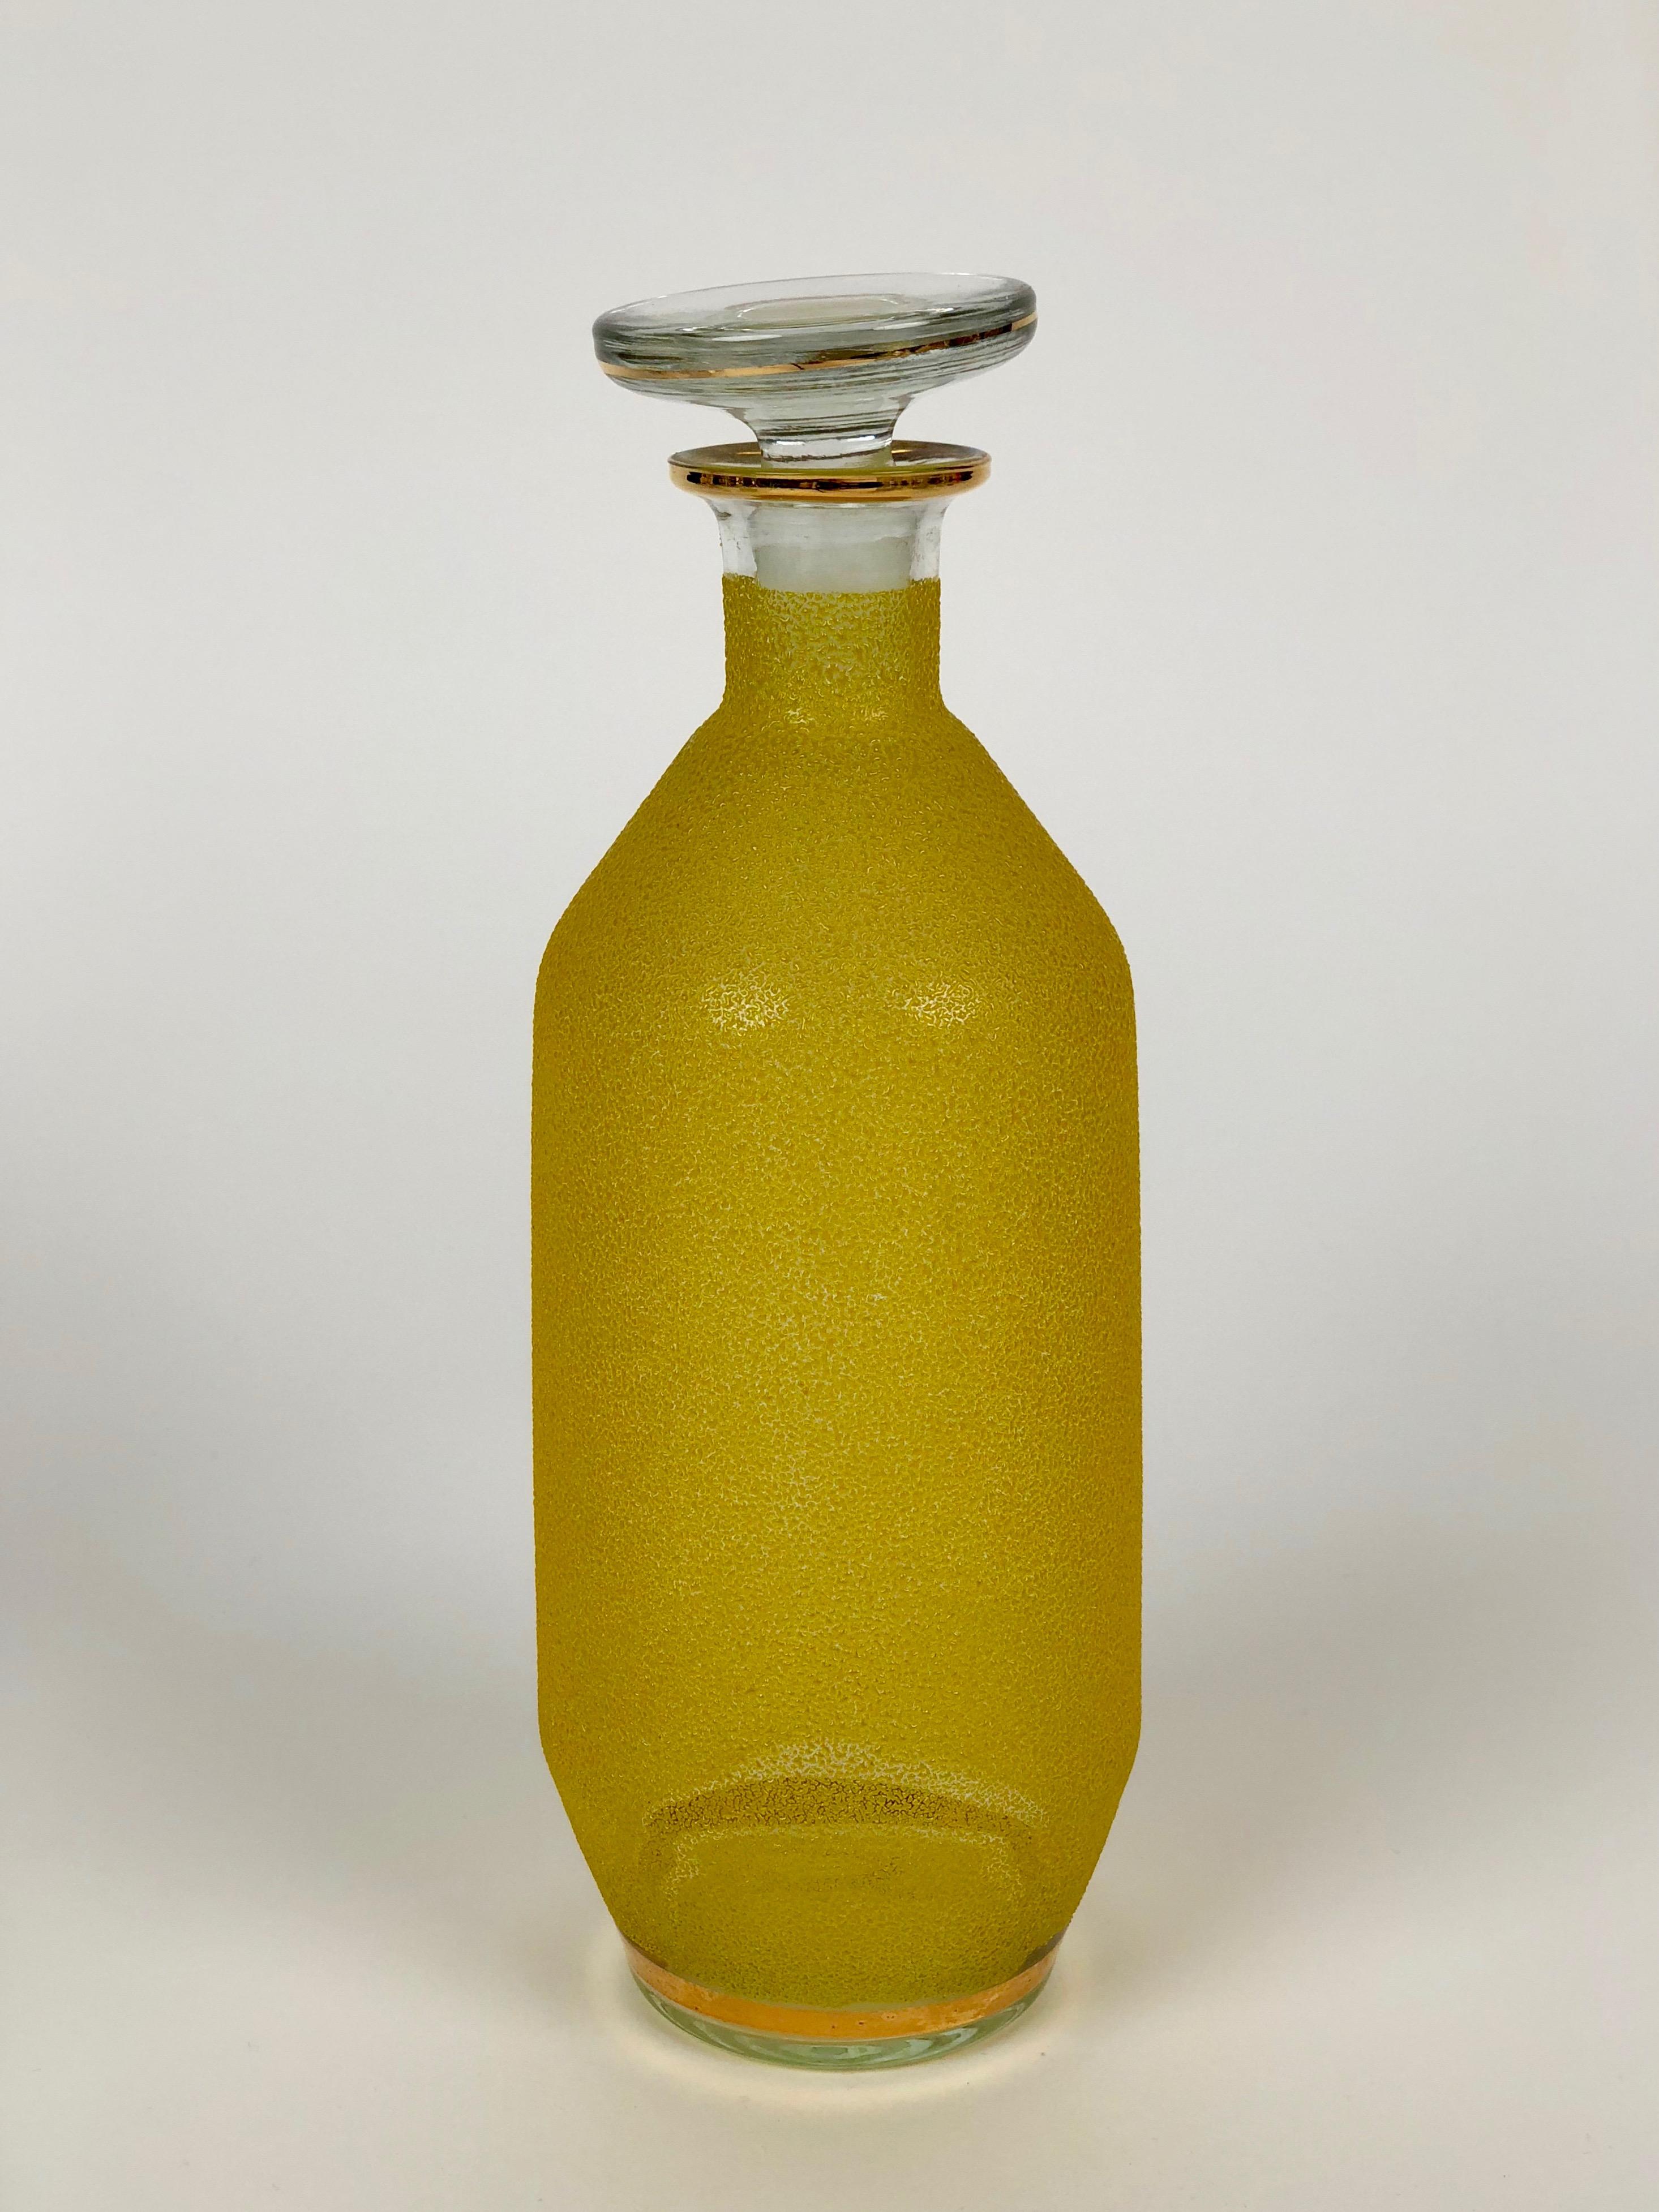 Midcentury glass carafe with yellow glass decor and golden stripes.
The color consists of colored glass particles attached to glass body.

You can use it for liquor or as a creative alternative for oils
and vinegars